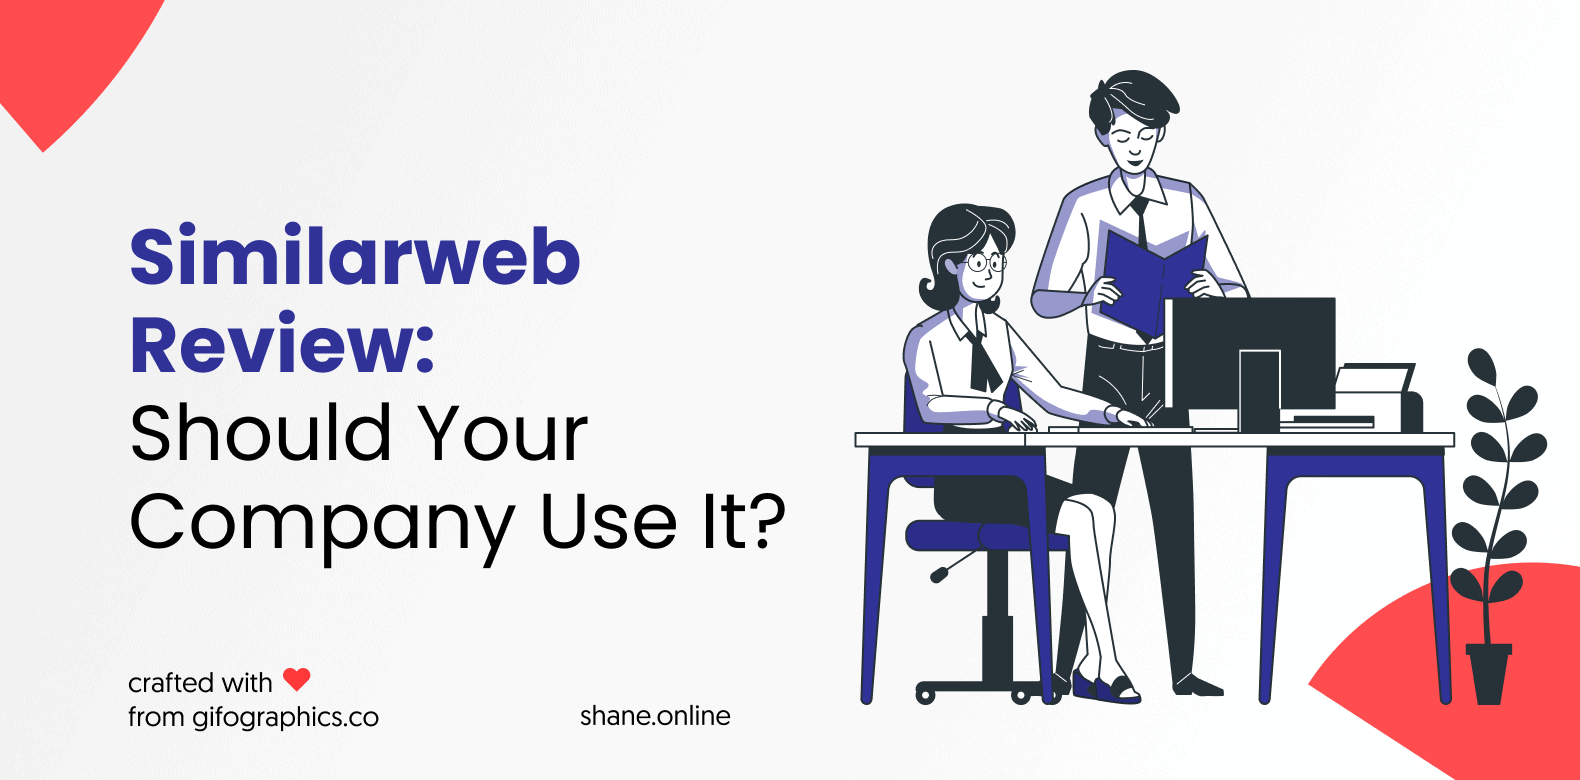 Similarweb Review 2020: Is It the Best for Website Analysis?